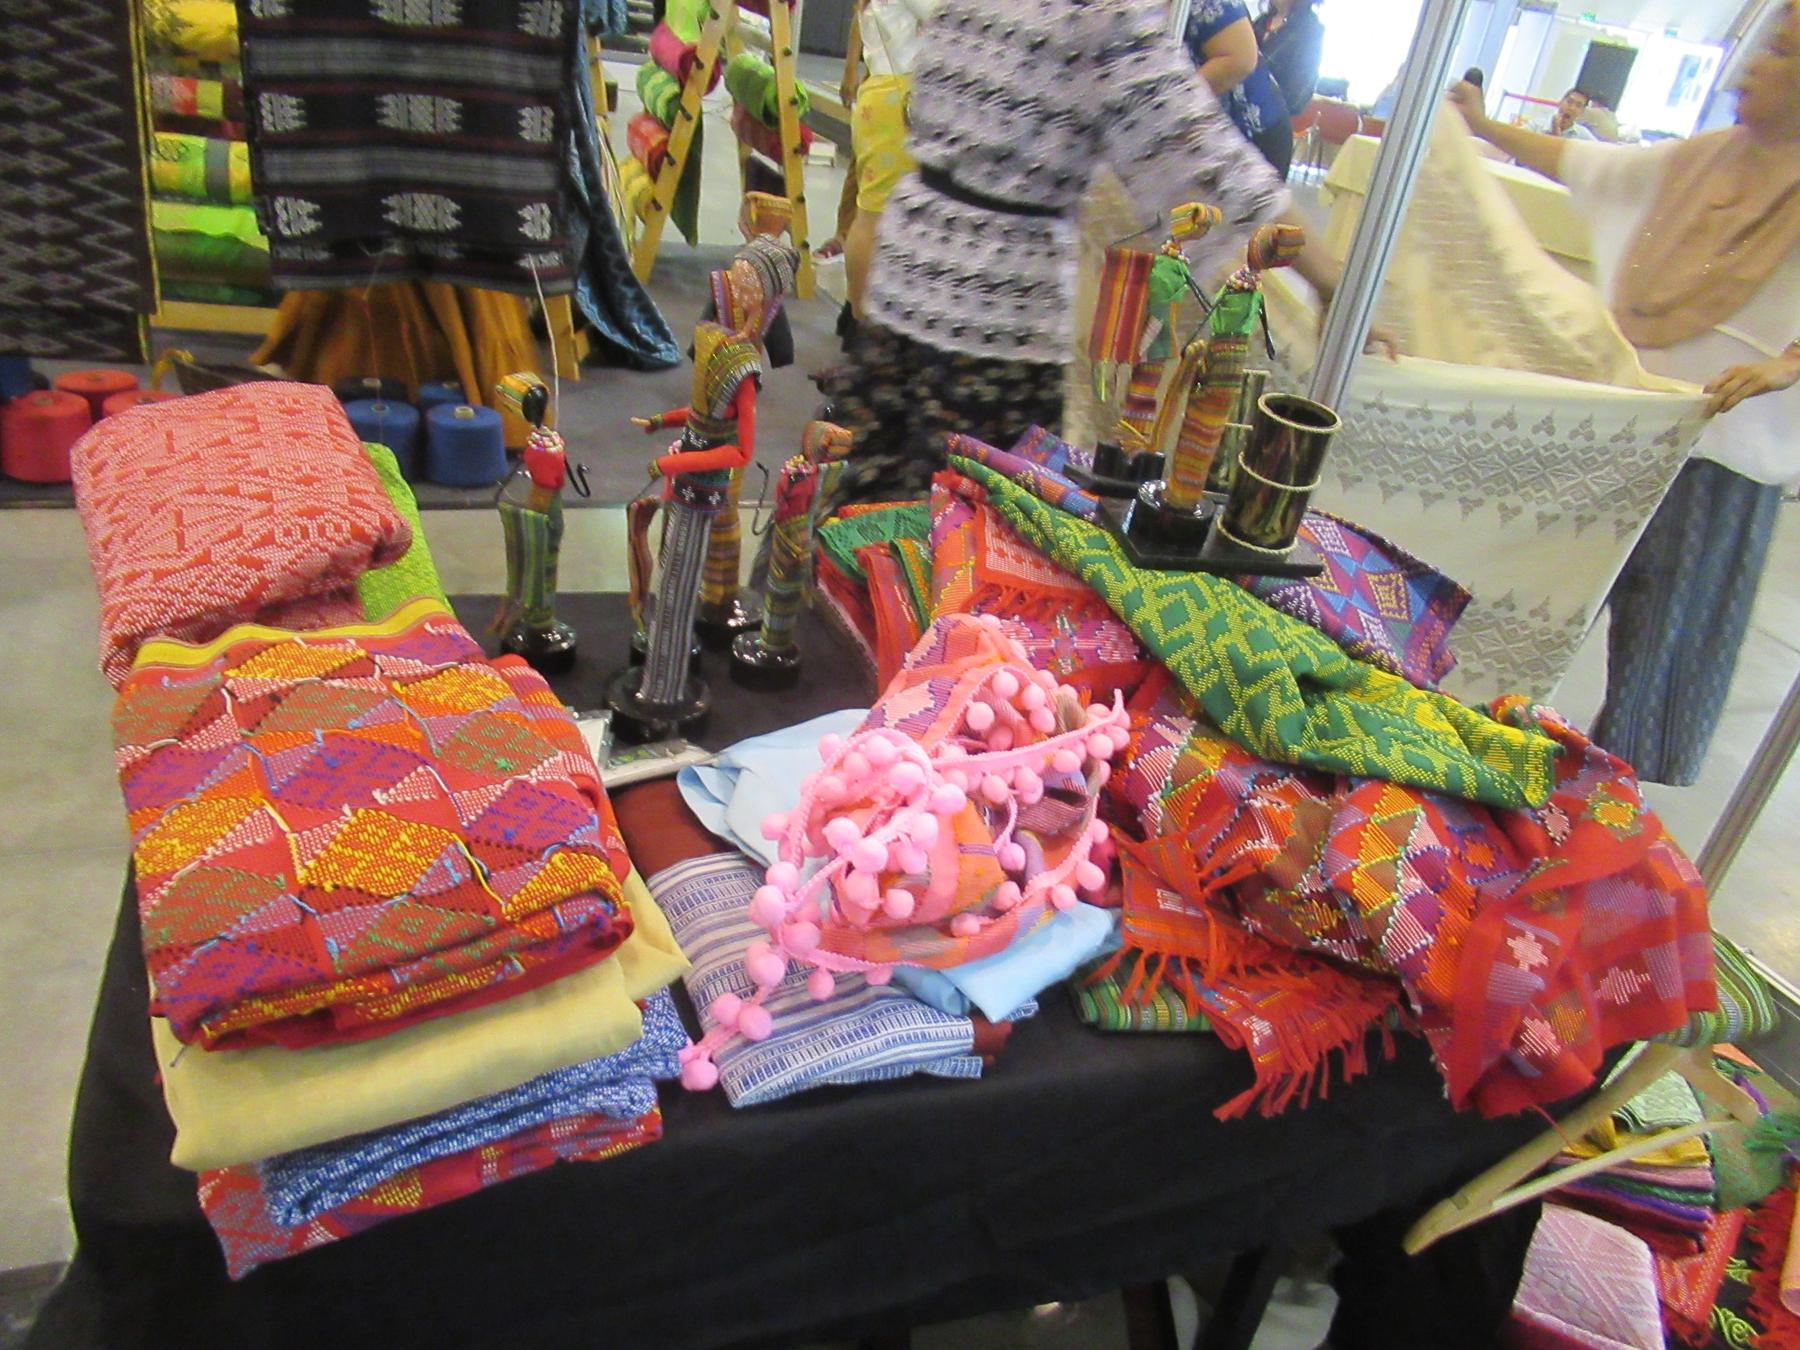 'Likha' (Exhibit) 35 - a table with a bunch of colorful blankets and a stuffed elephant